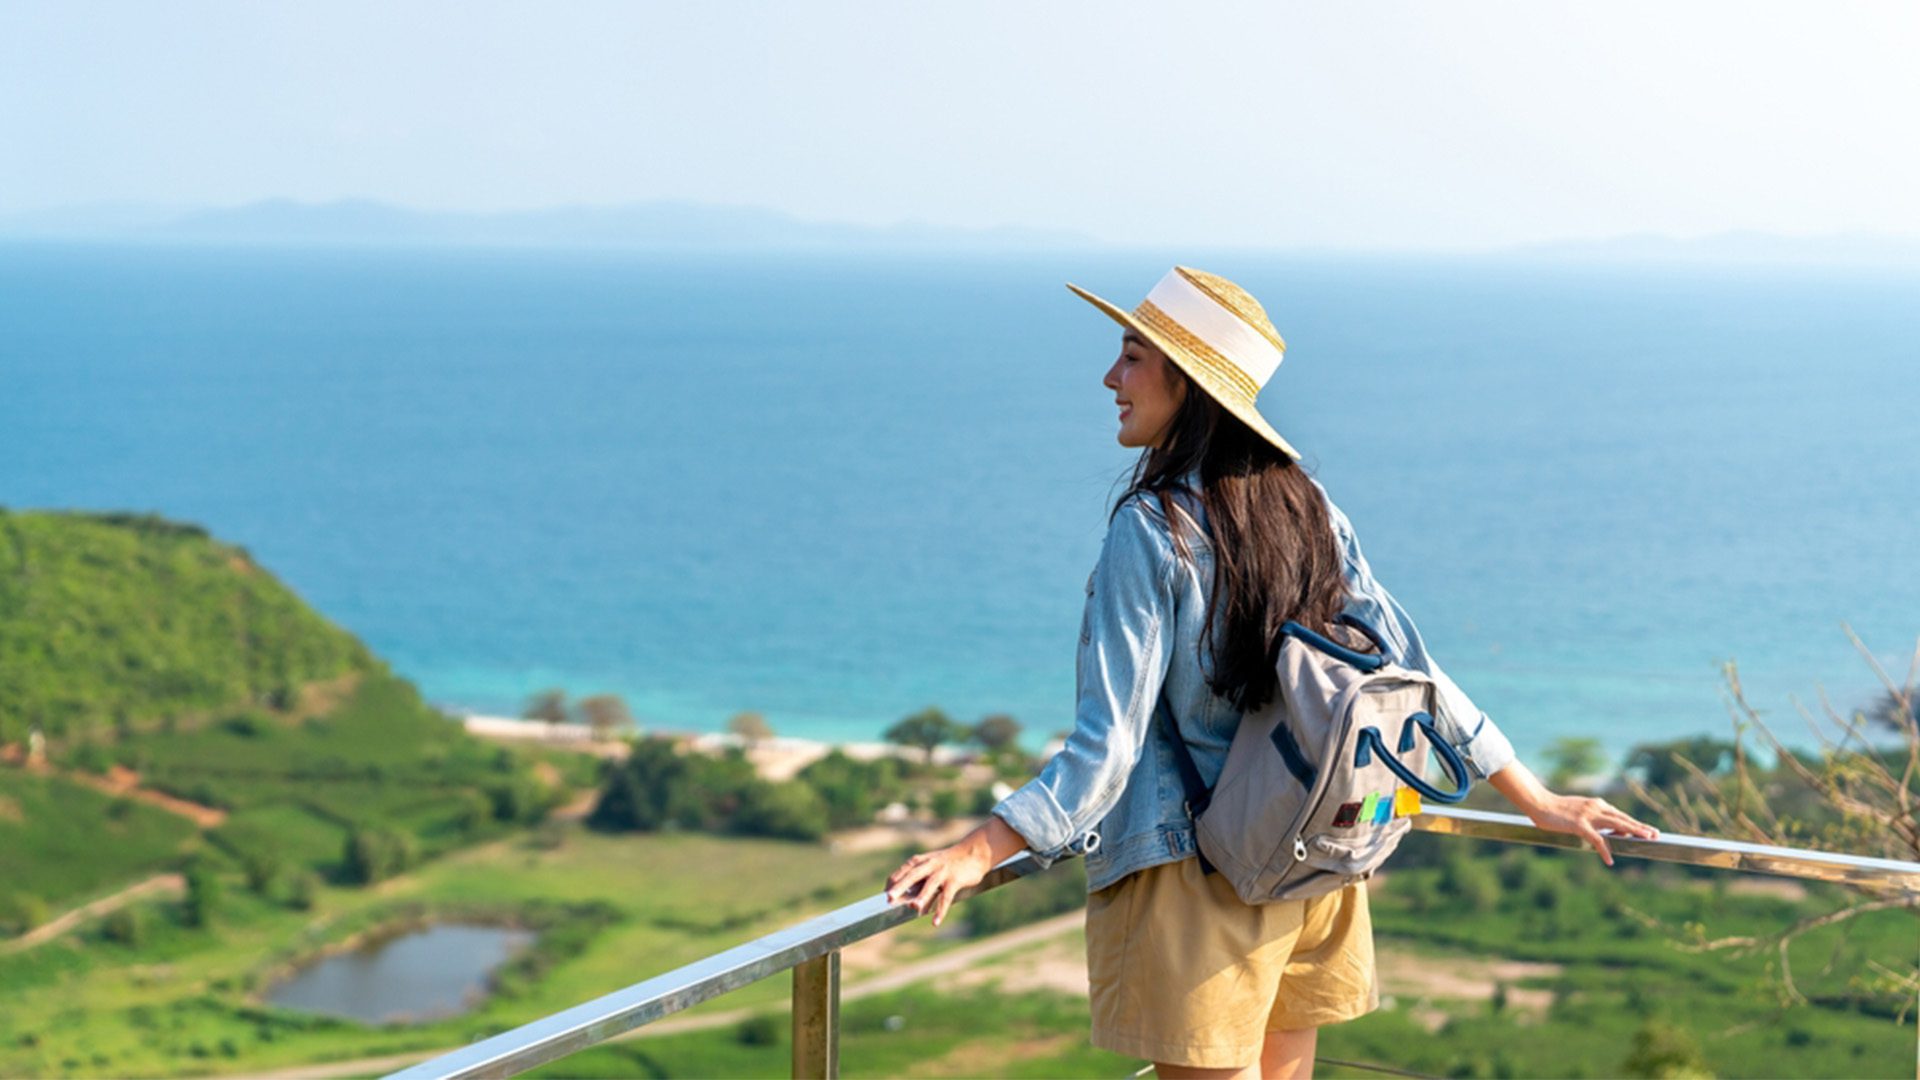 Solo Traveler Overlooking View Tips From Experts